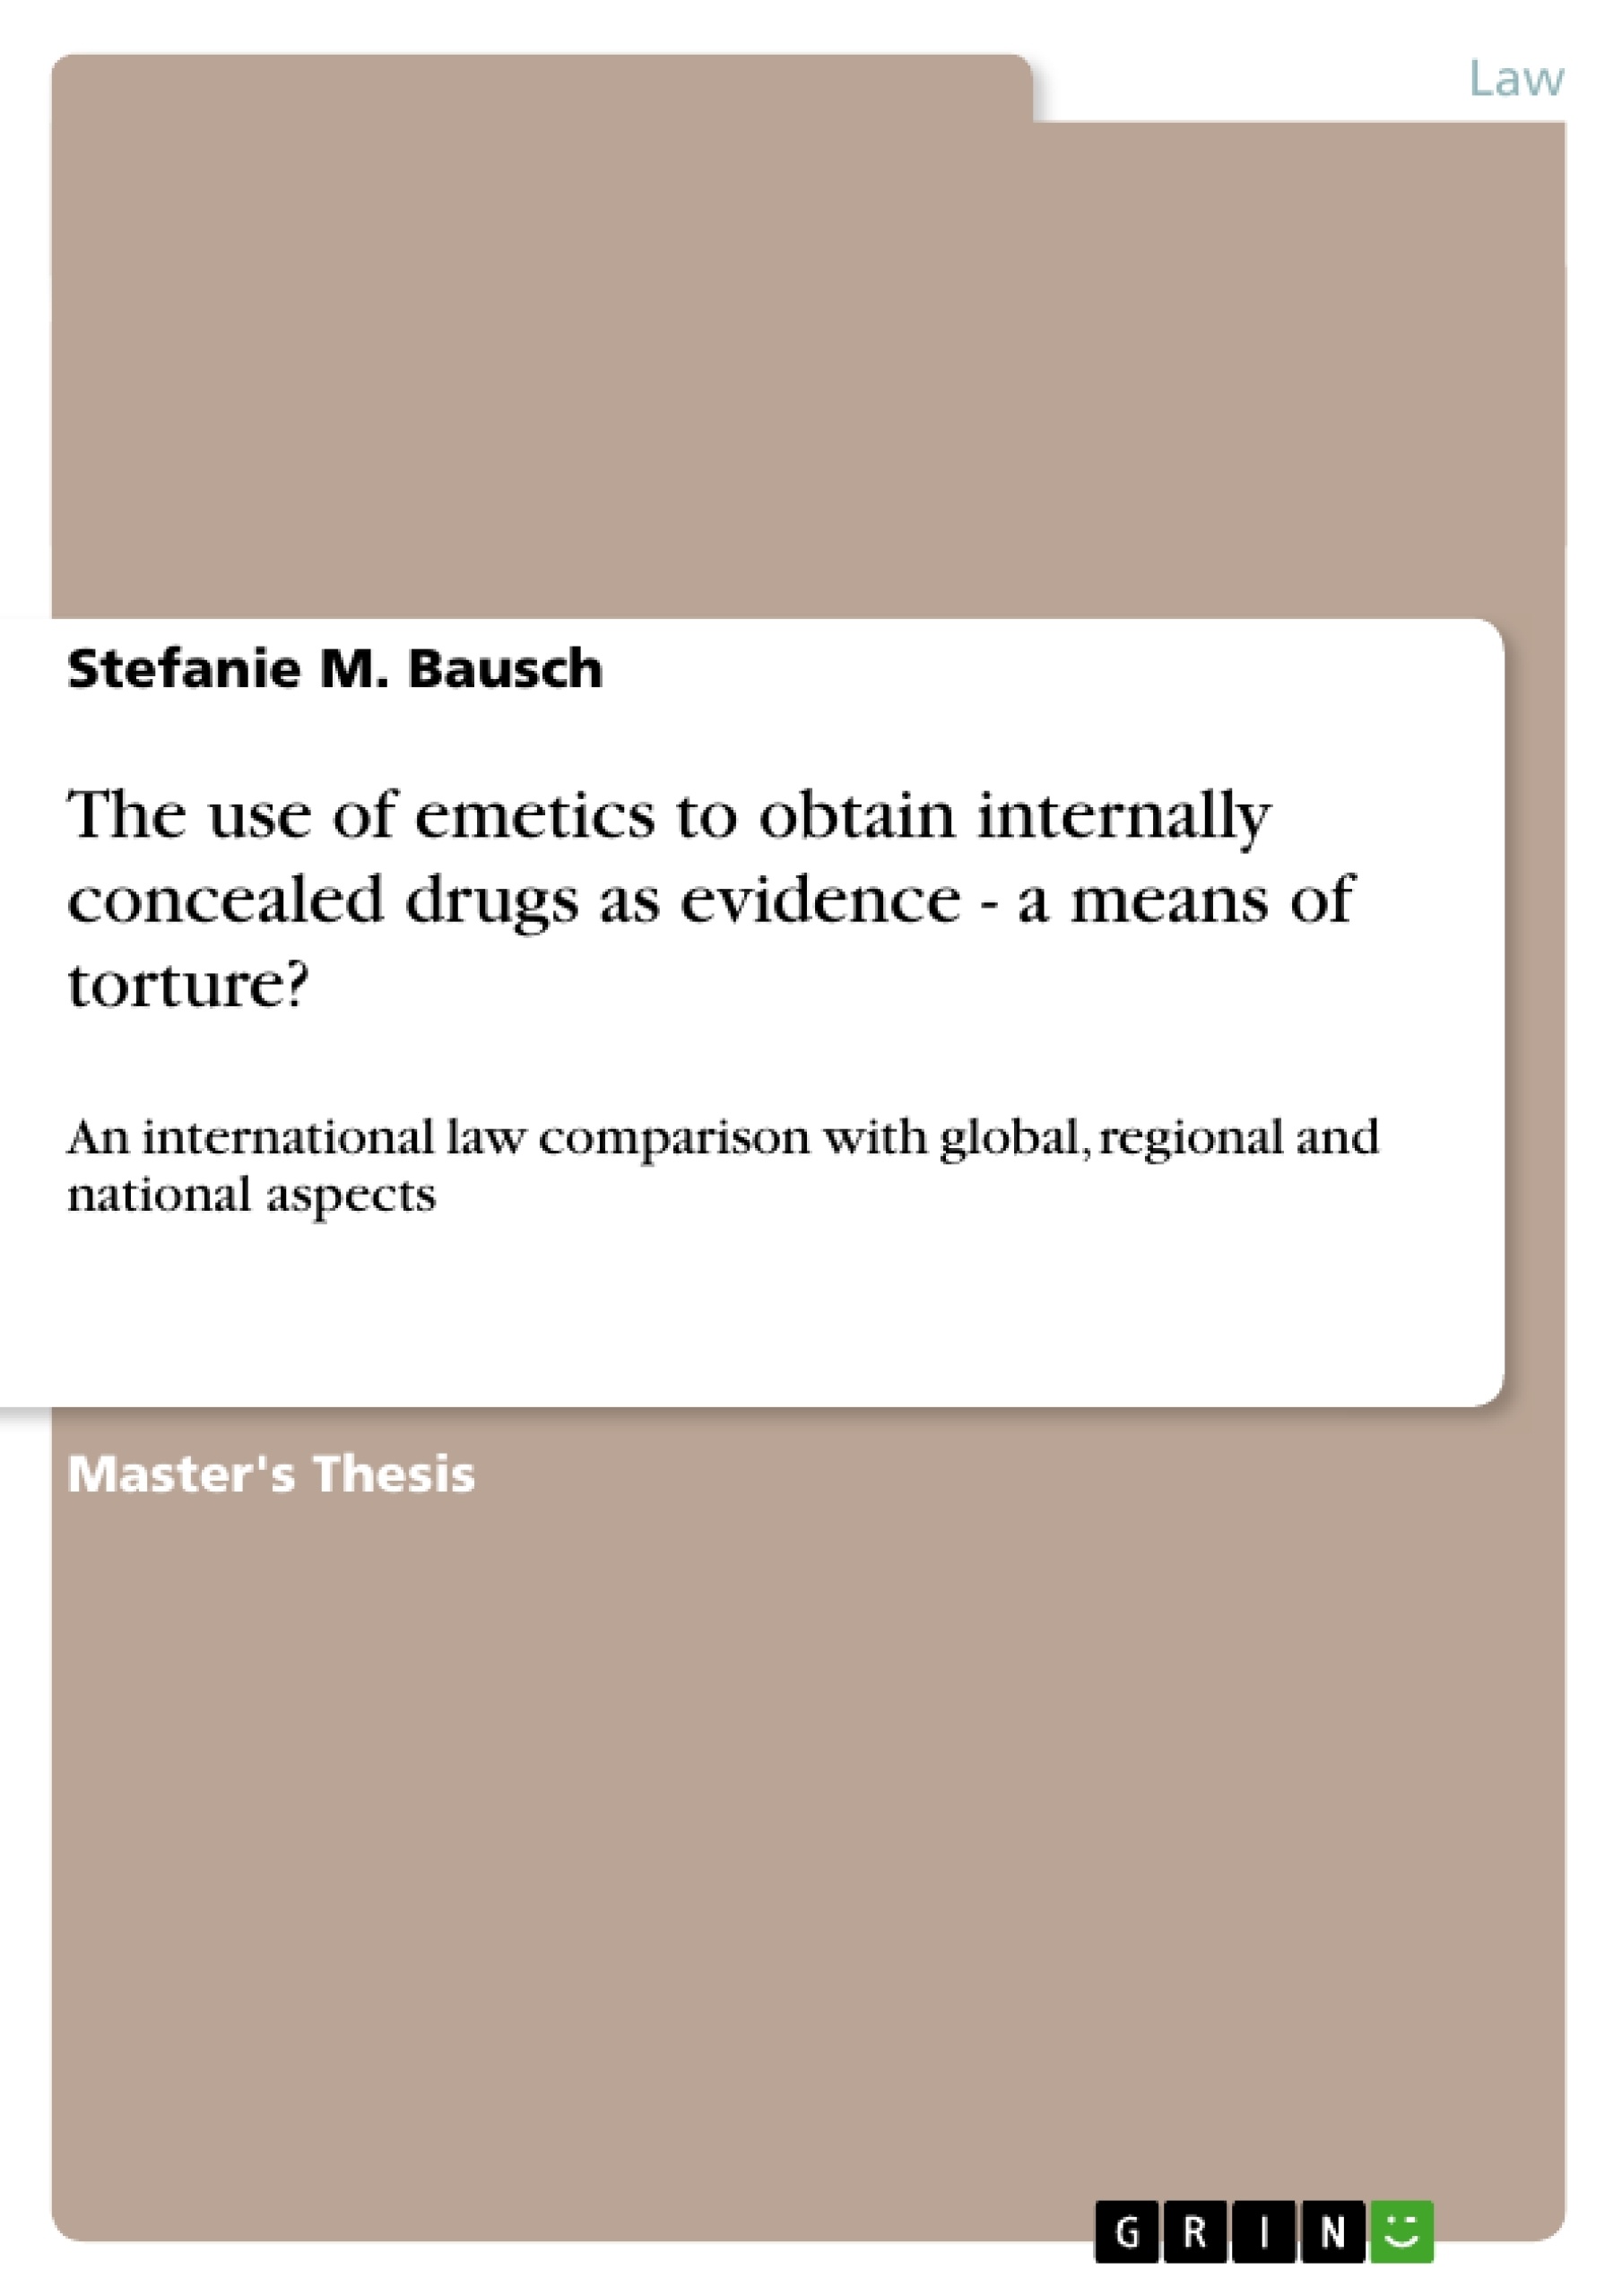 Title: The use of emetics to obtain internally concealed drugs as evidence - a means of torture?